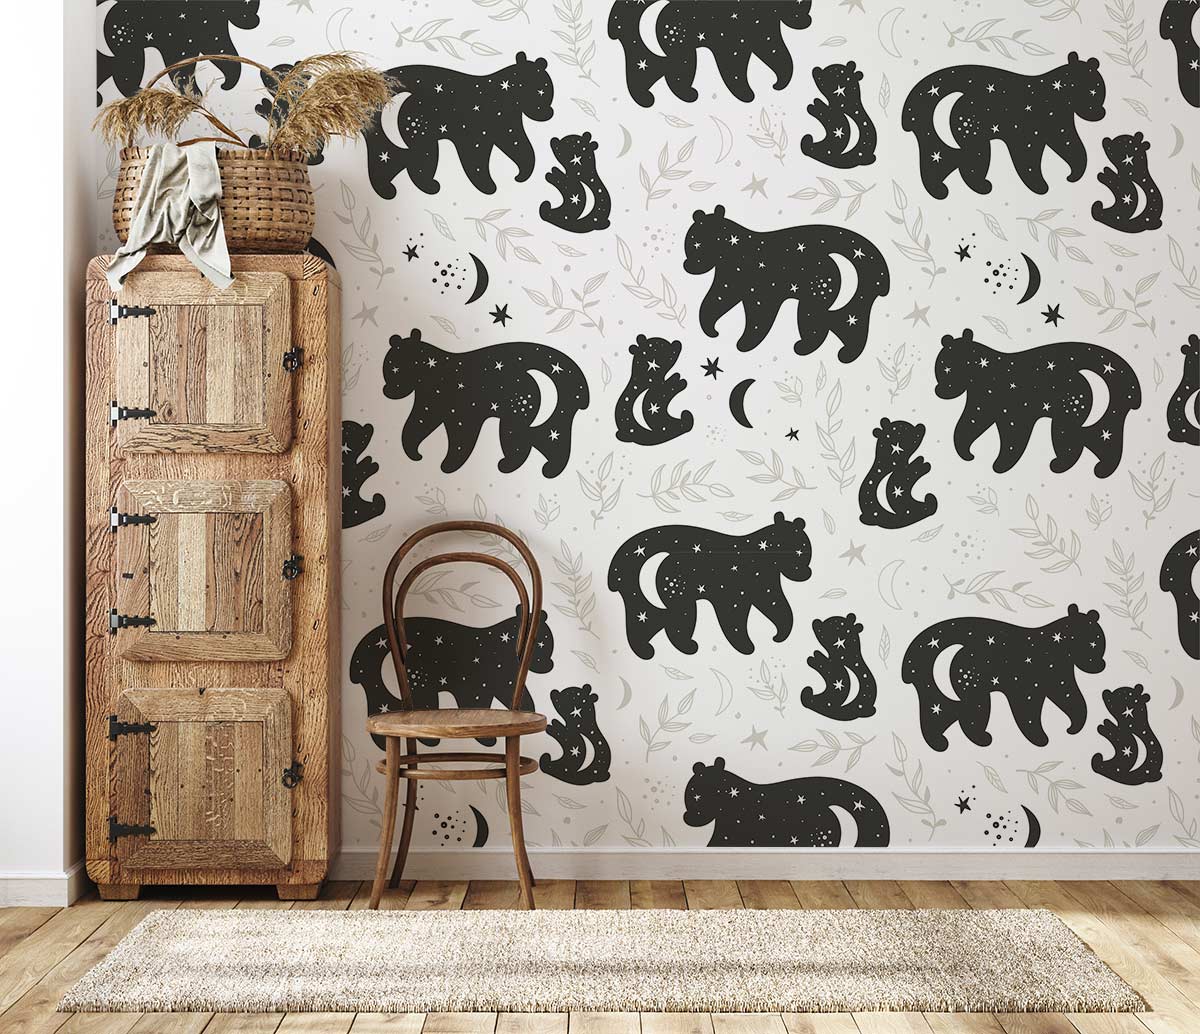 Animal wall mural with moon, stars, and leaves in cartoon style